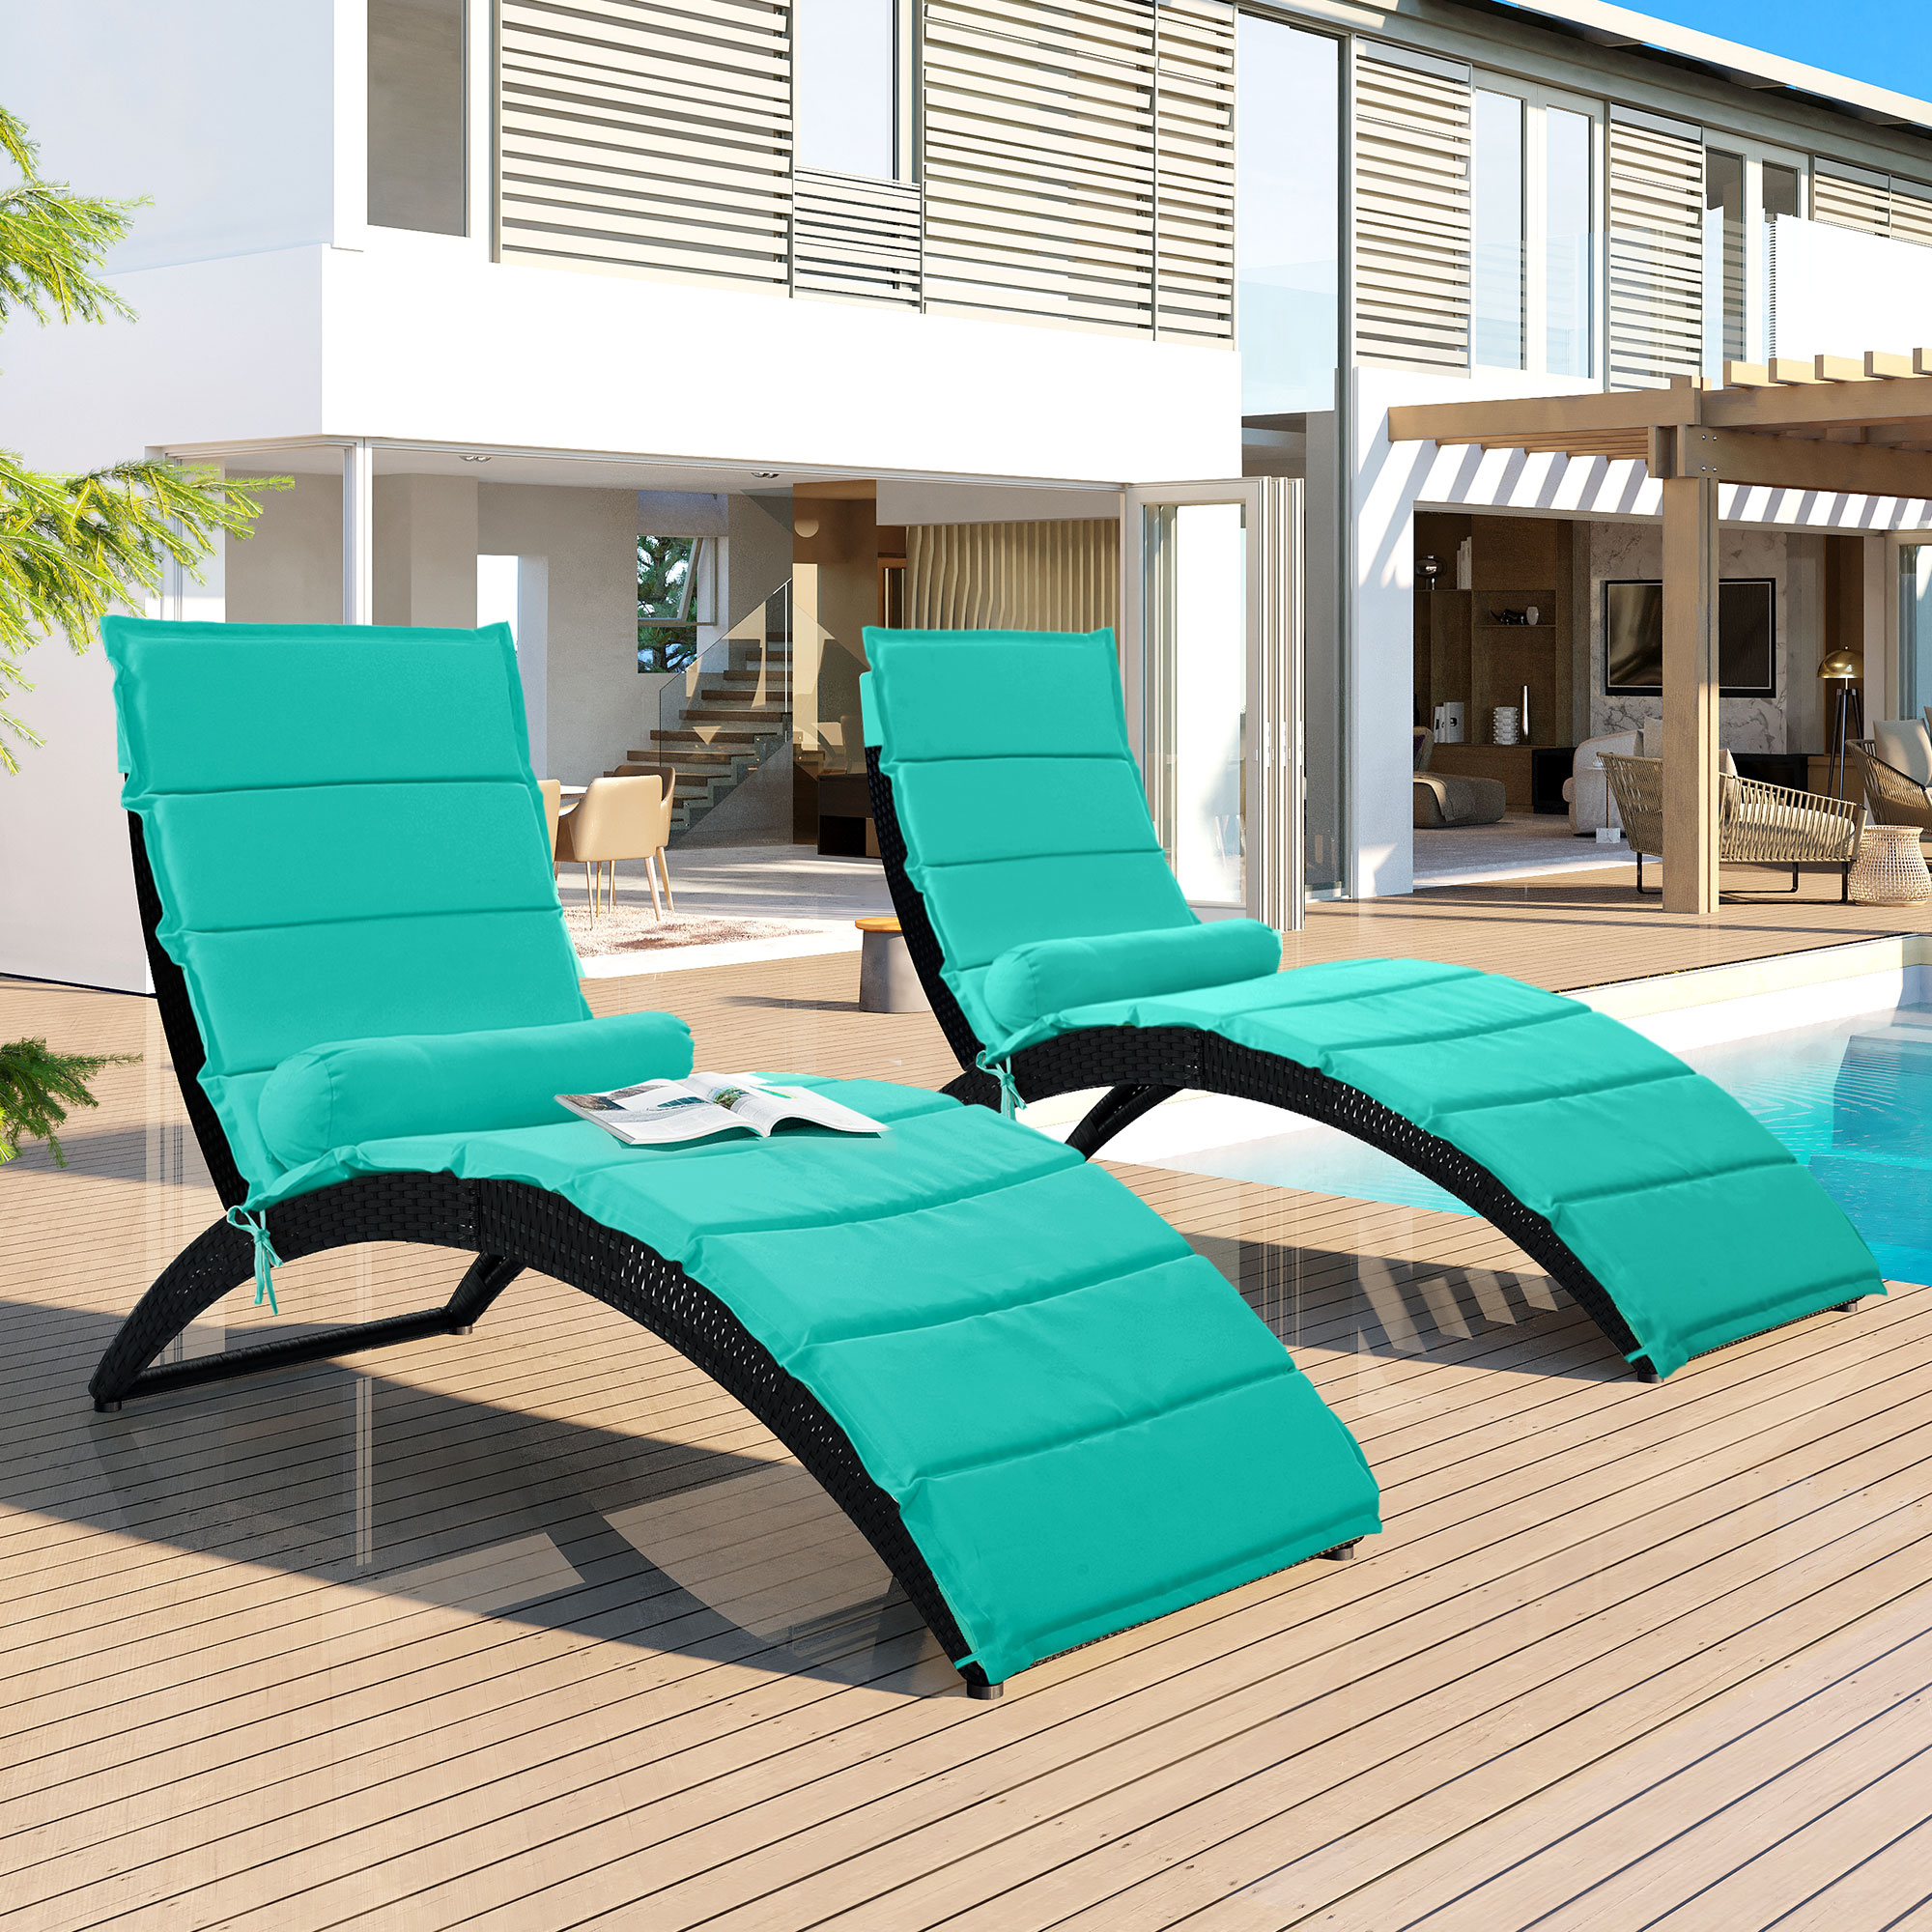 Chaise Lounge Chairs for Outside, 2 Pieces PE Wicker Foldable Reclining Chairs, Patio Sun Lounger with Removable Cushions, Rattan Chaise Chair for Poolside, Garden, Backyard, Greenish-blue, D8595 - image 1 of 10